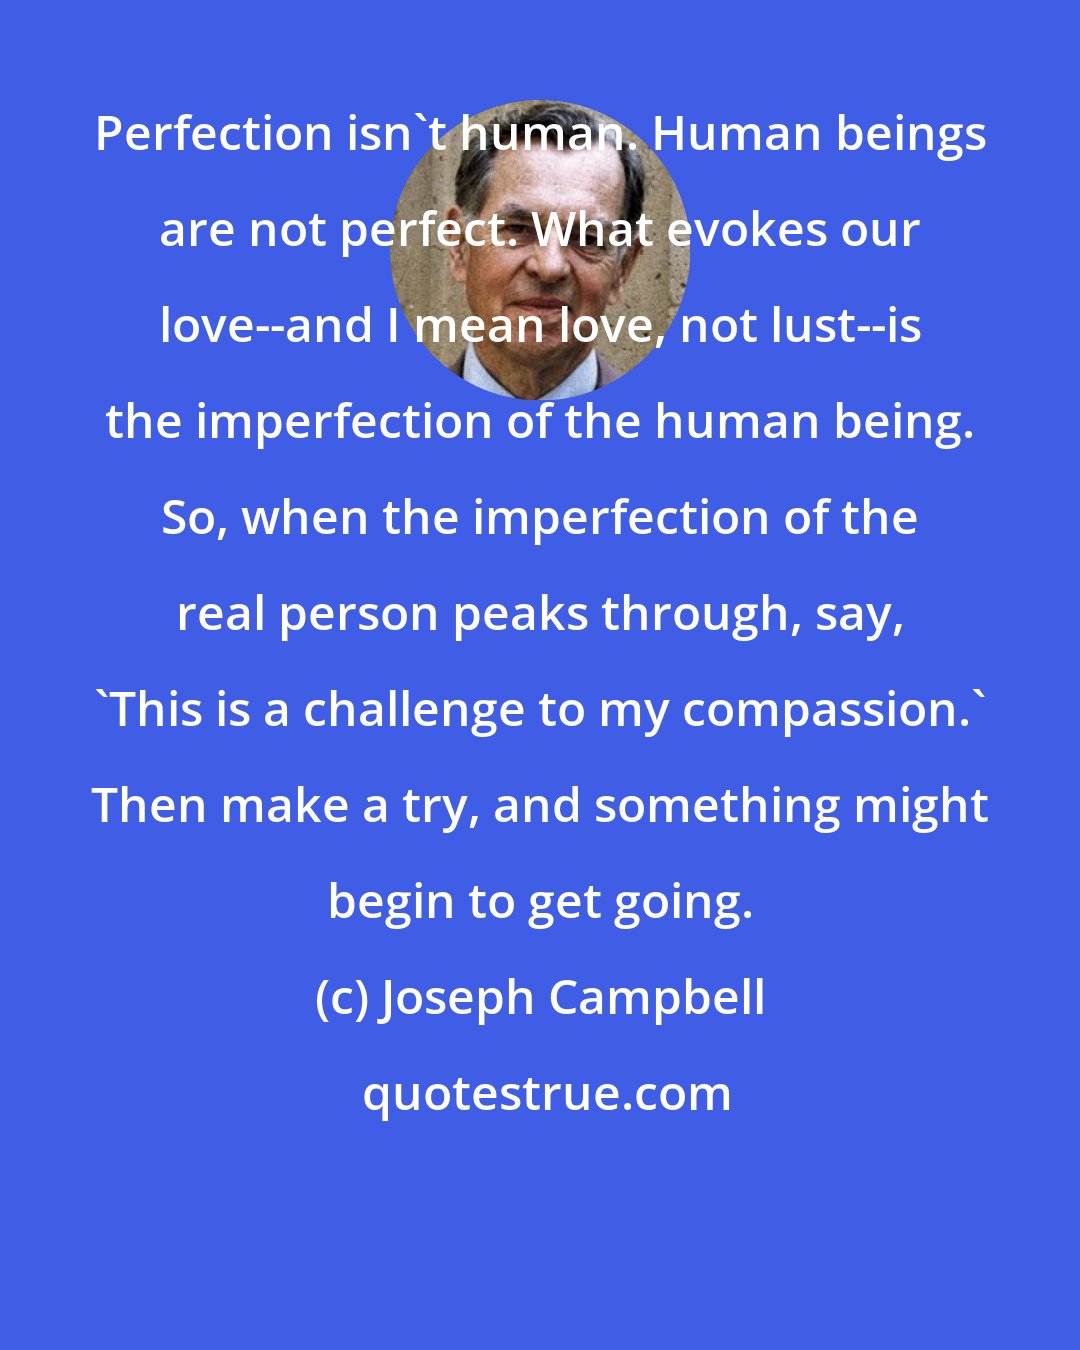 Joseph Campbell: Perfection isn't human. Human beings are not perfect. What evokes our love--and I mean love, not lust--is the imperfection of the human being. So, when the imperfection of the real person peaks through, say, 'This is a challenge to my compassion.' Then make a try, and something might begin to get going.